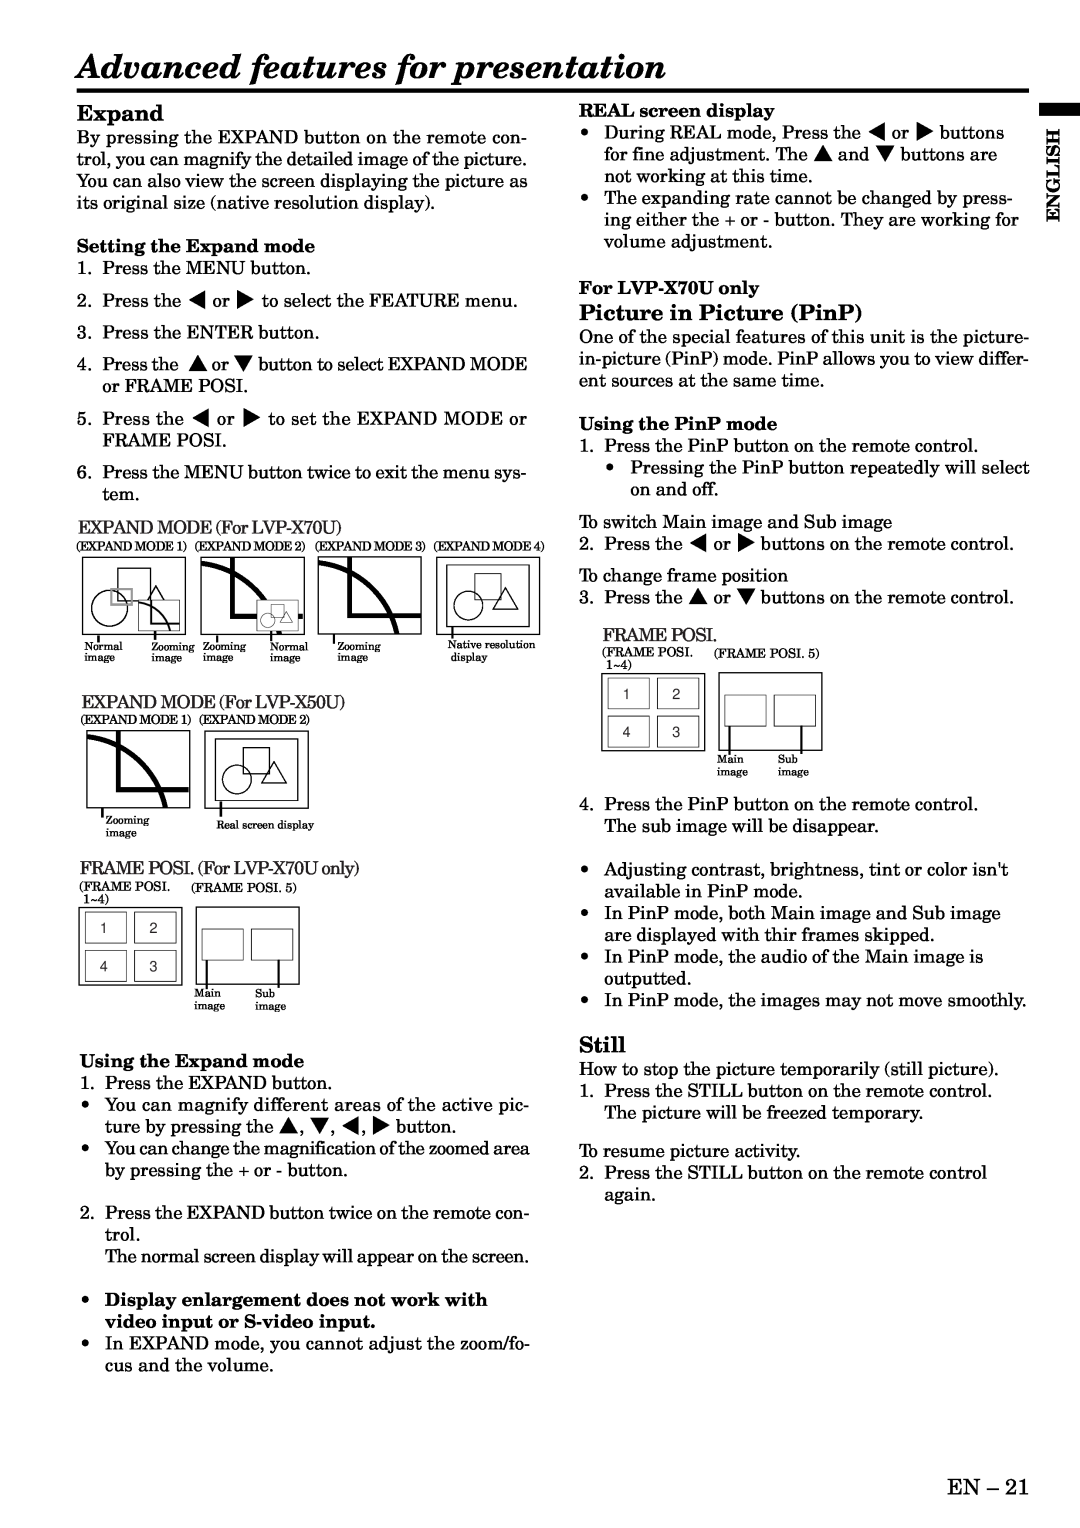 Mitsubishi Electronics X70U user manual Advanced features for presentation, Expand, Picture in Picture PinP, Still 